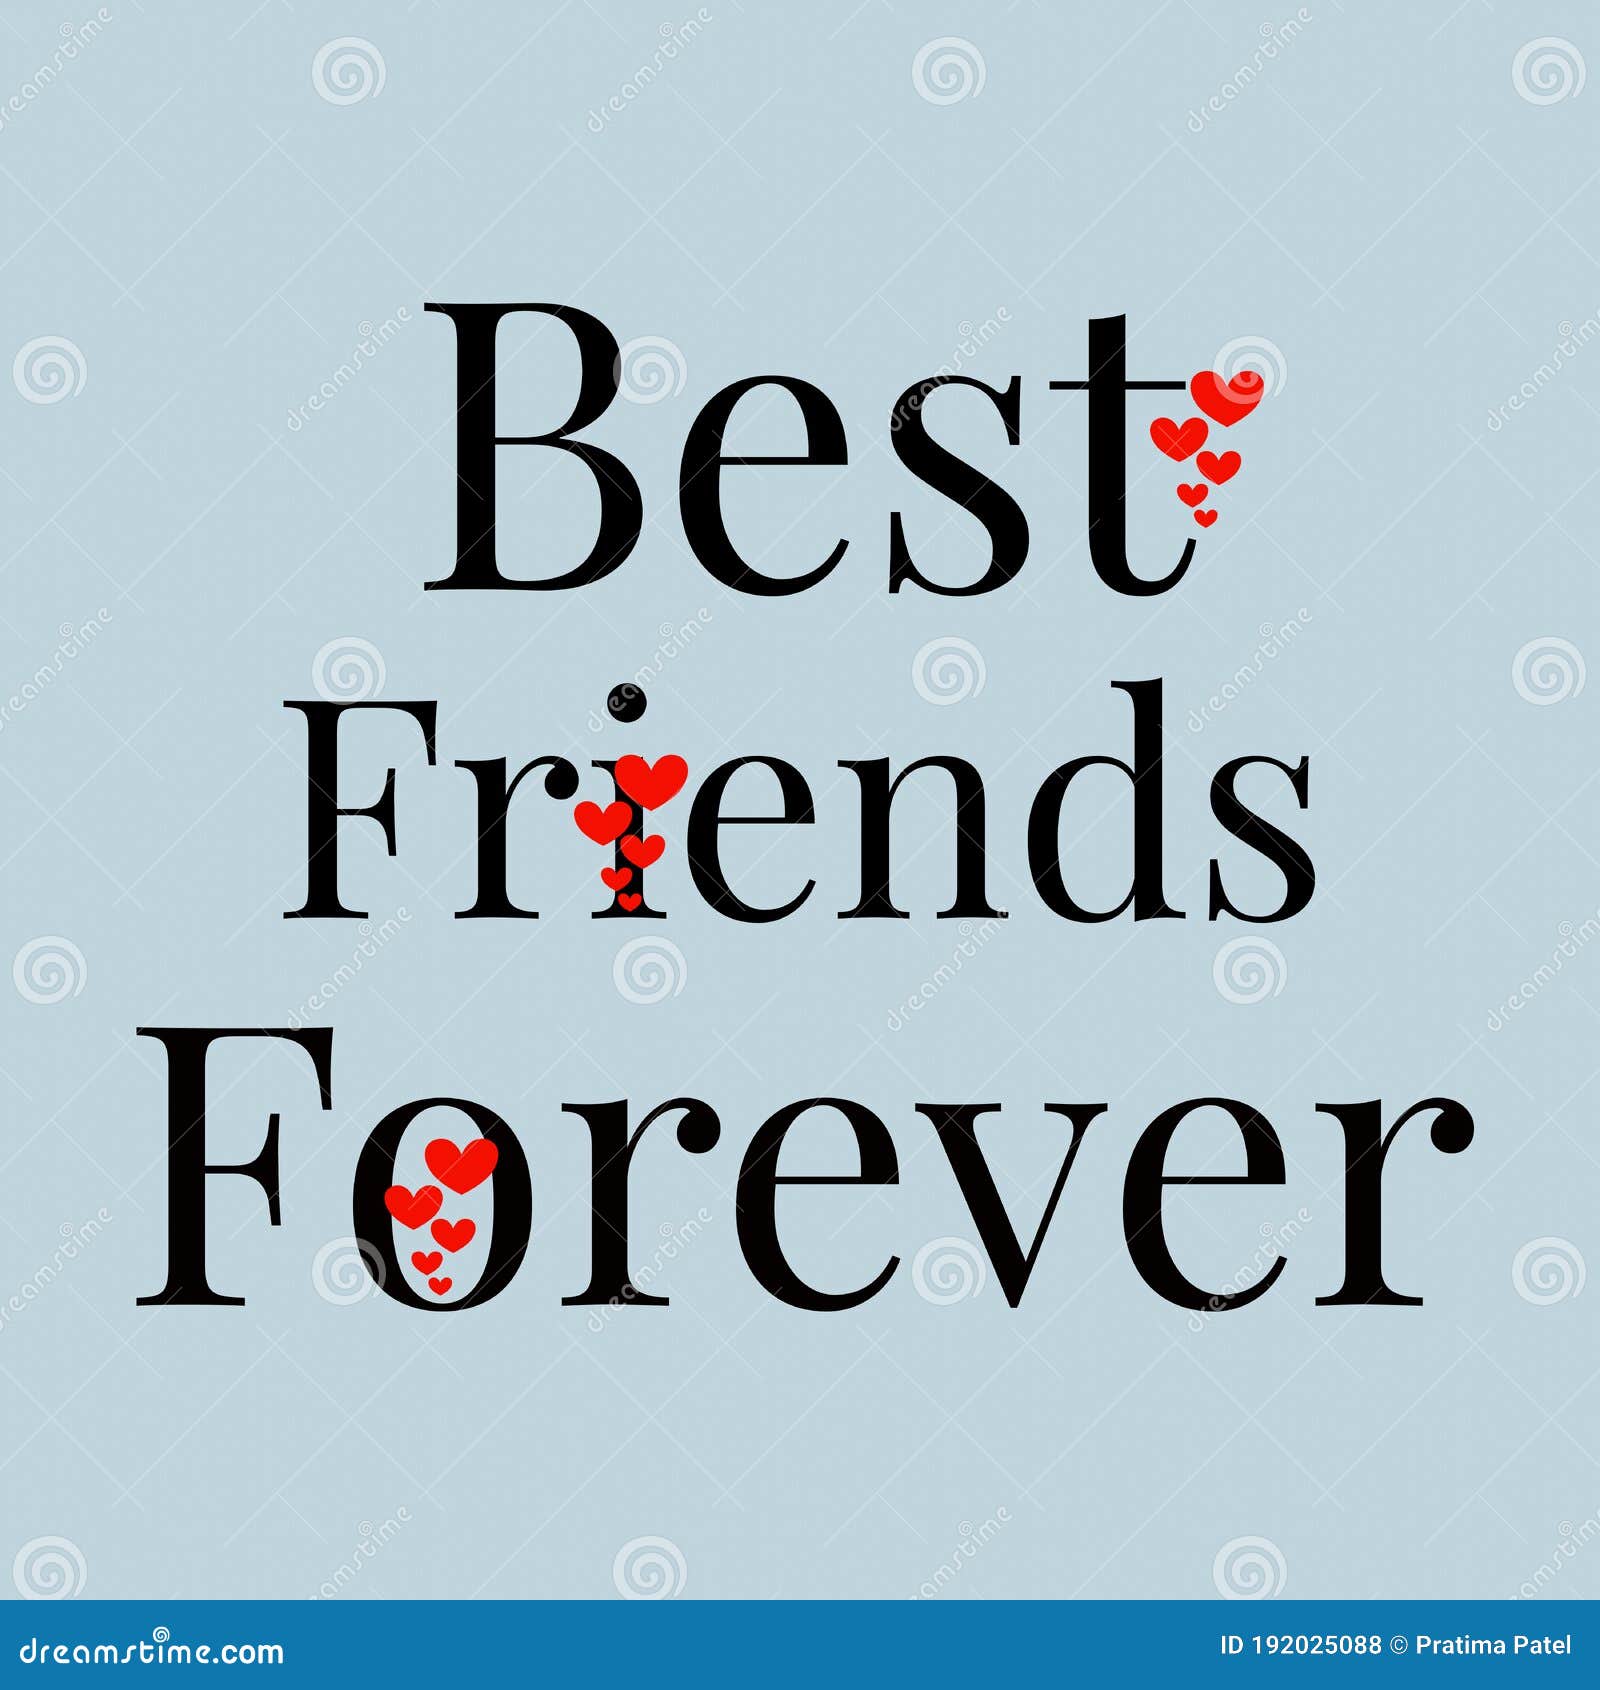 Best Friends Forever Text Written on Abstract Background with Colorful  Hearts Pattern, Graphic Design Illustration Wallpaper Stock Illustration -  Illustration of pattern, friends: 192025088